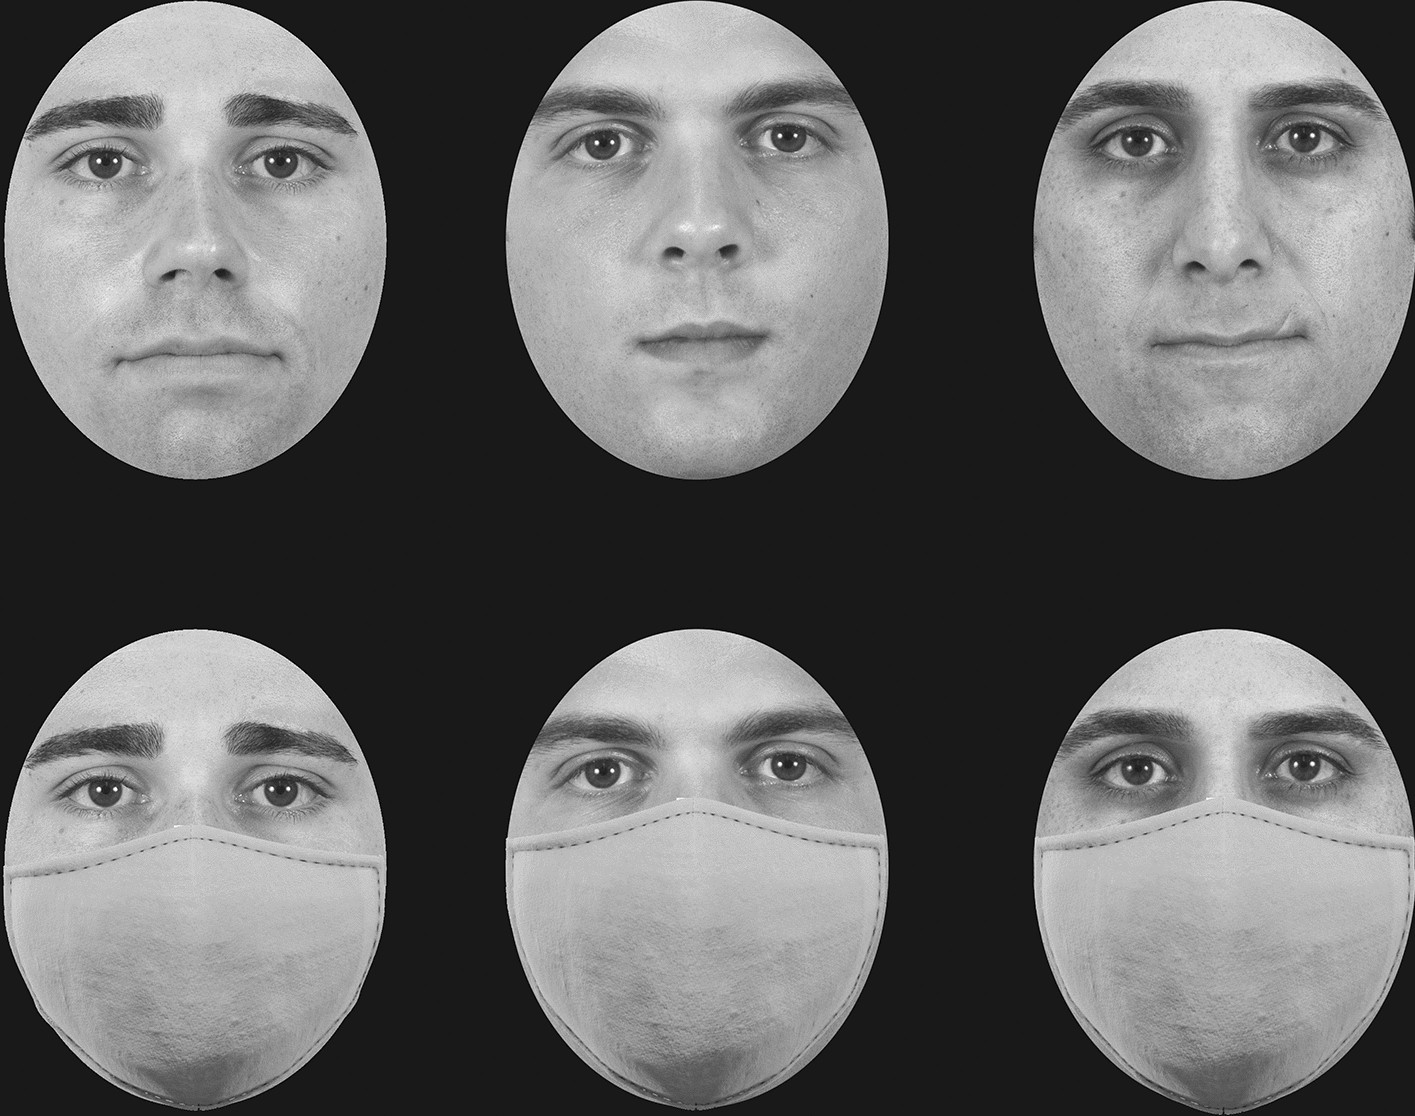 The COVID-19 pandemic masks the way people perceive faces Scientific Reports